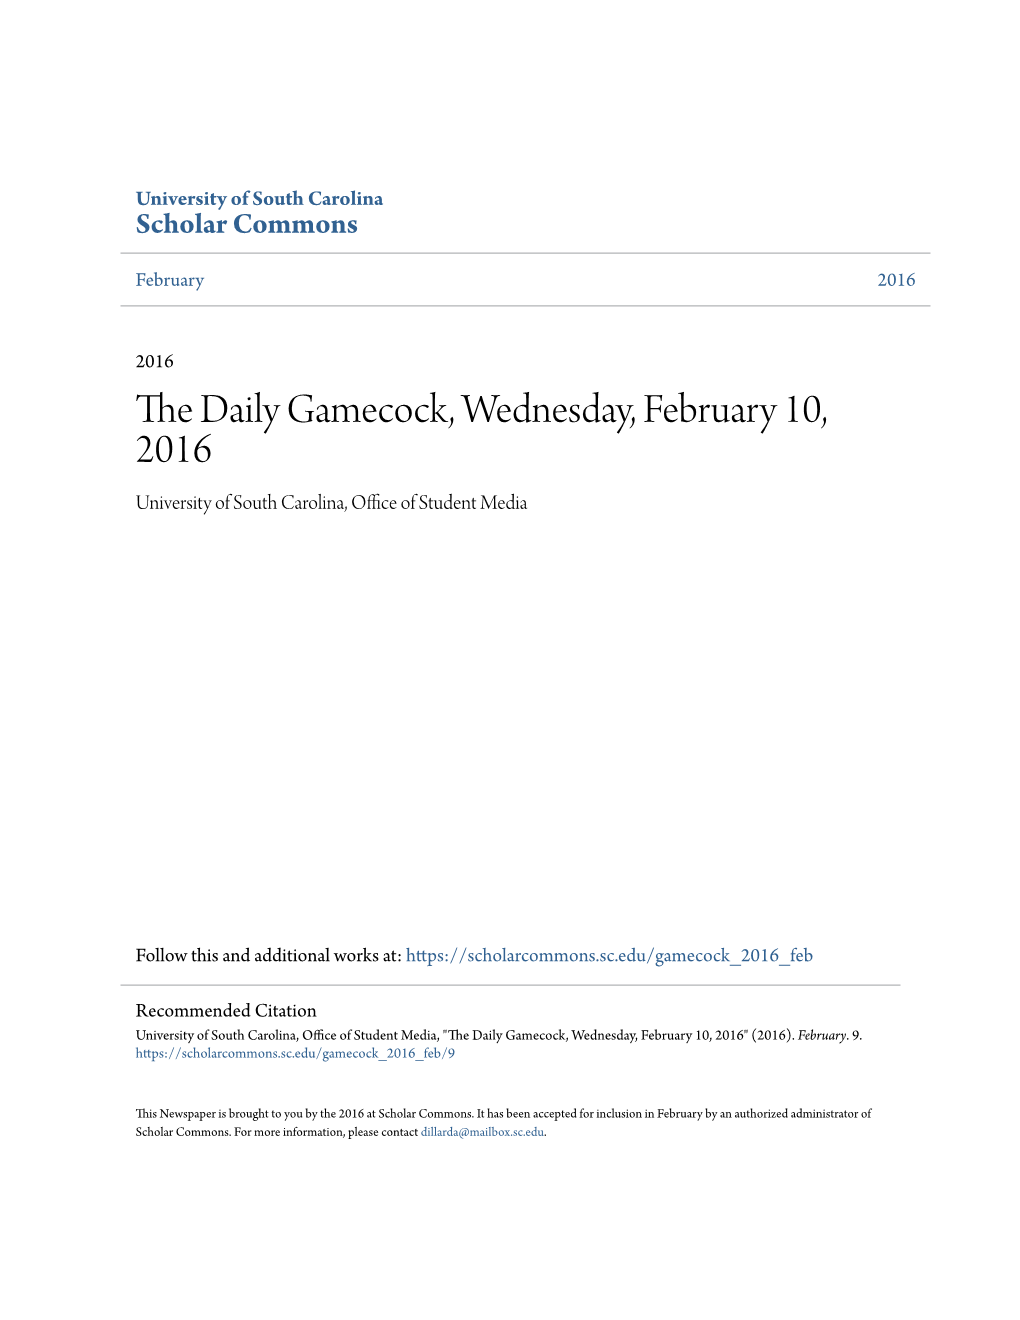 The Daily Gamecock, Wednesday, February 10, 2016